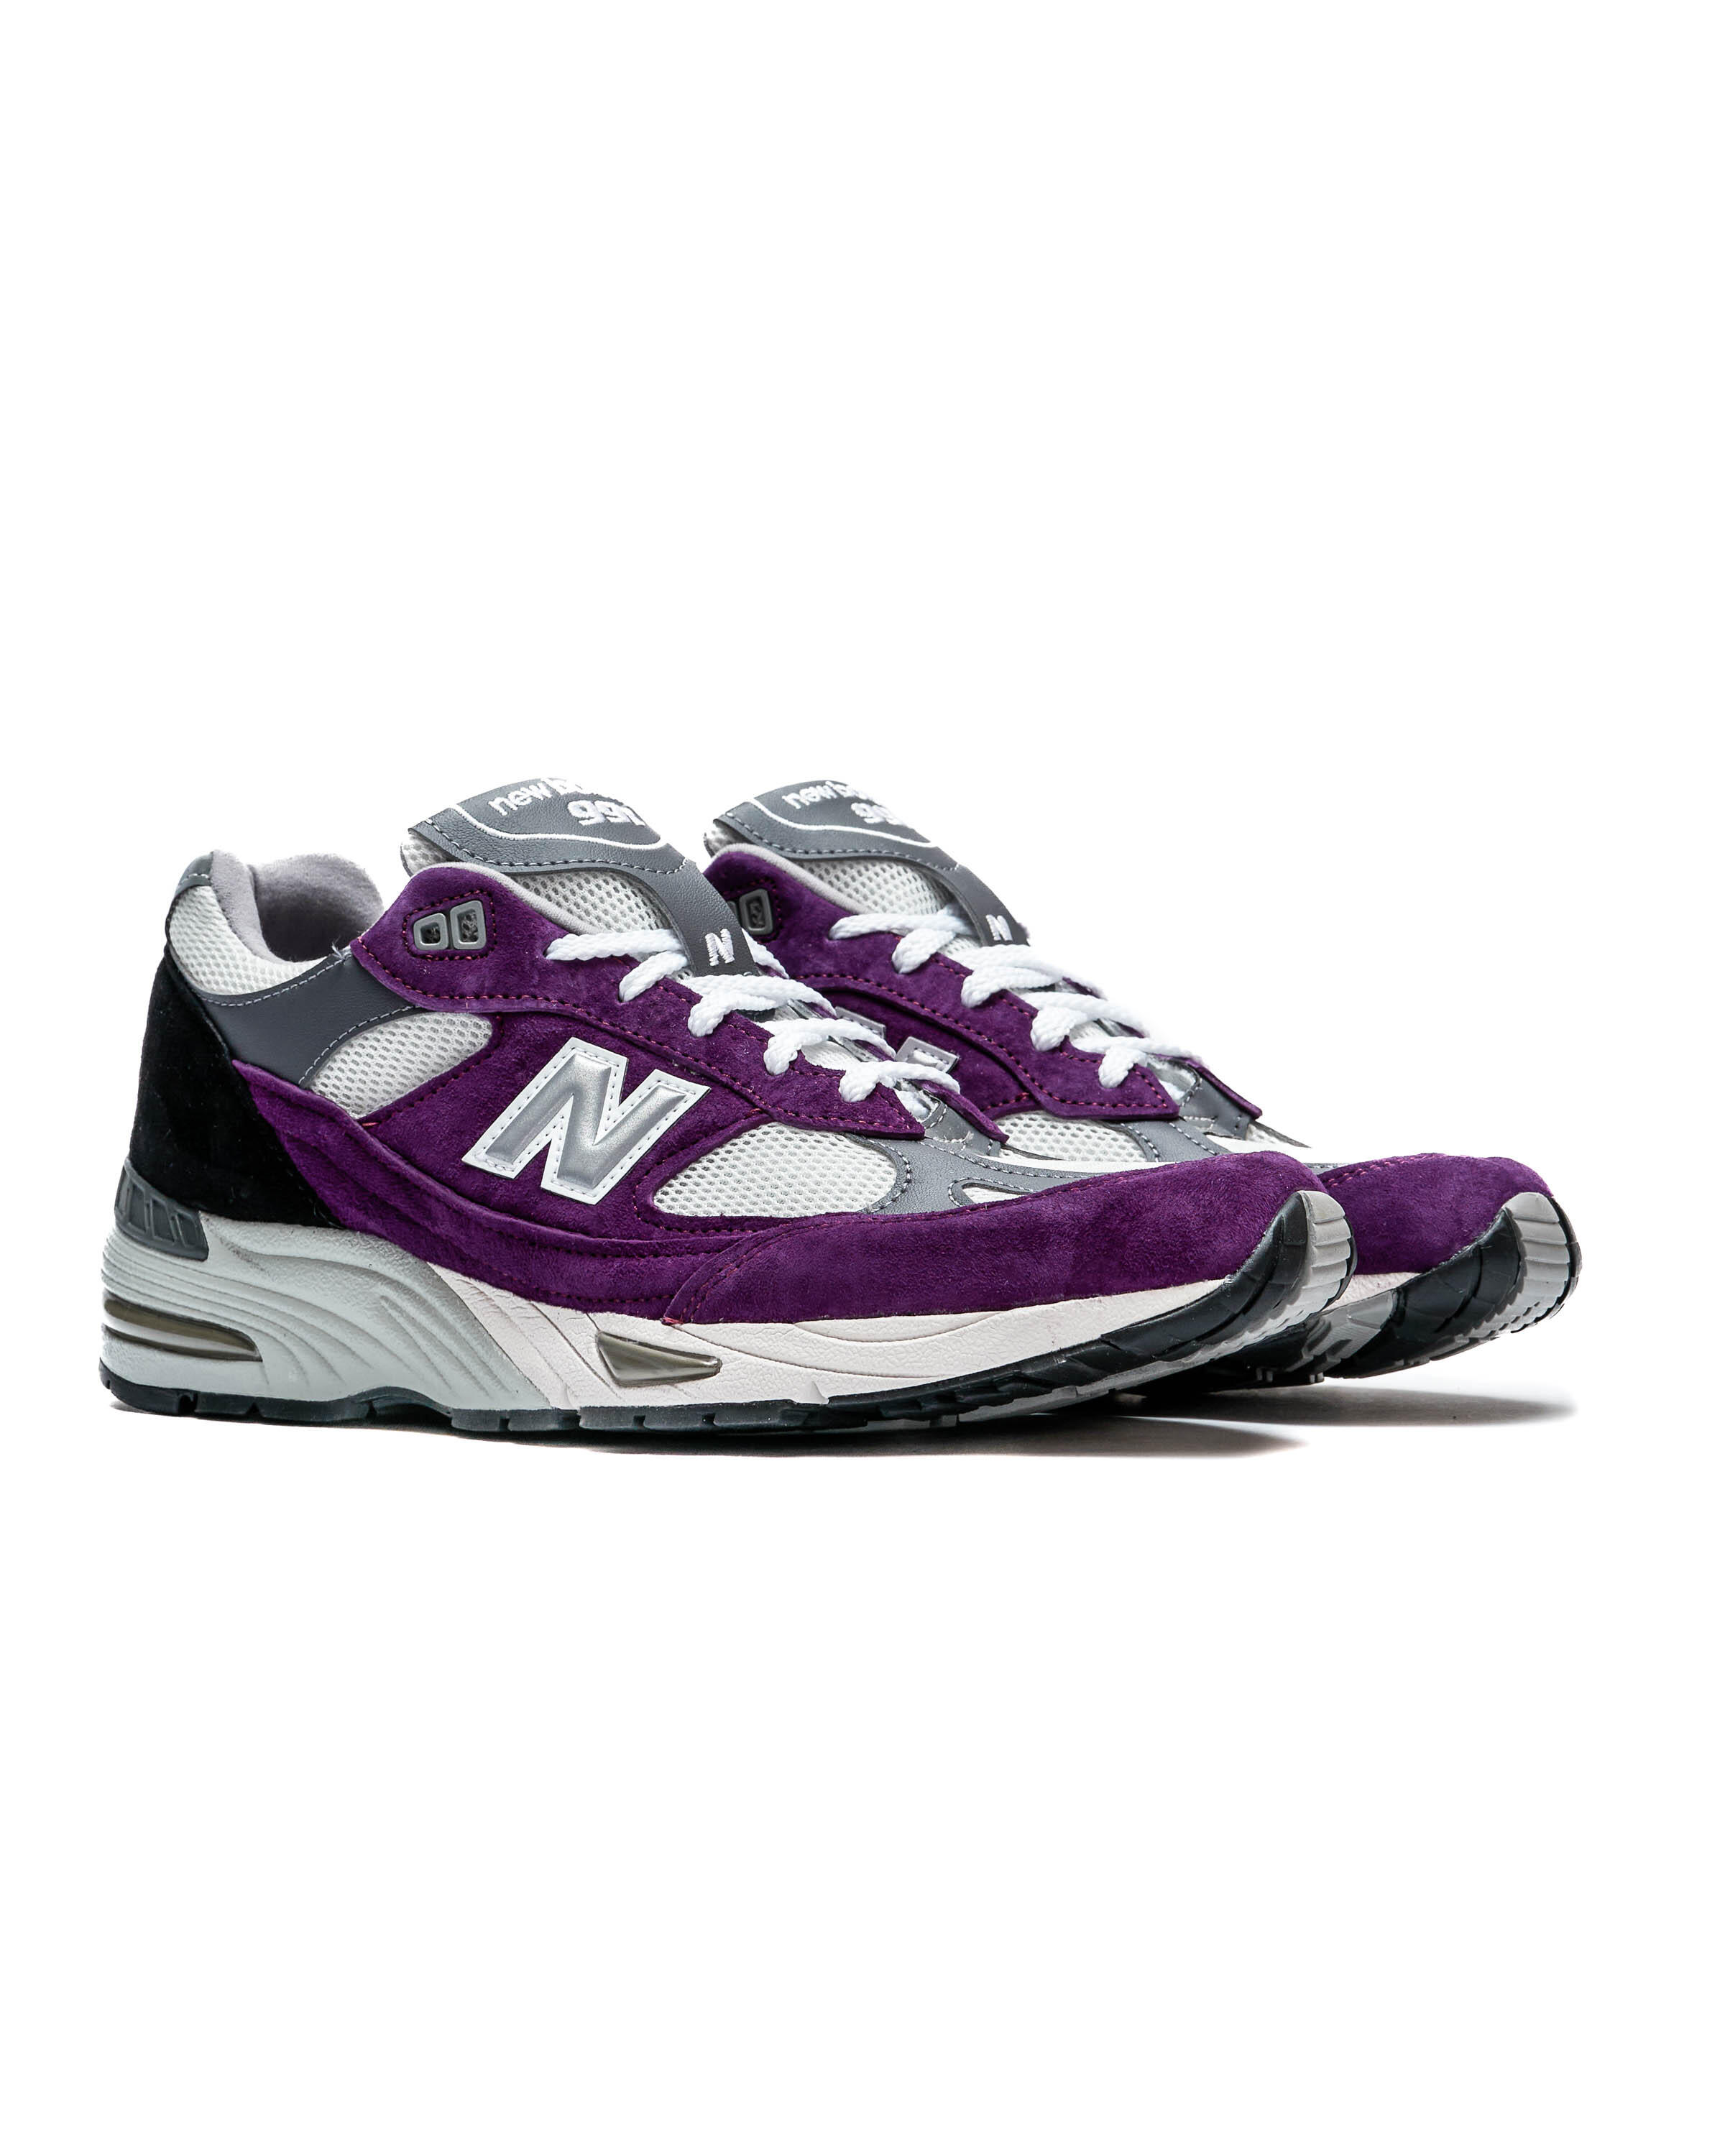 New Balance M 991 PUK - Made in England